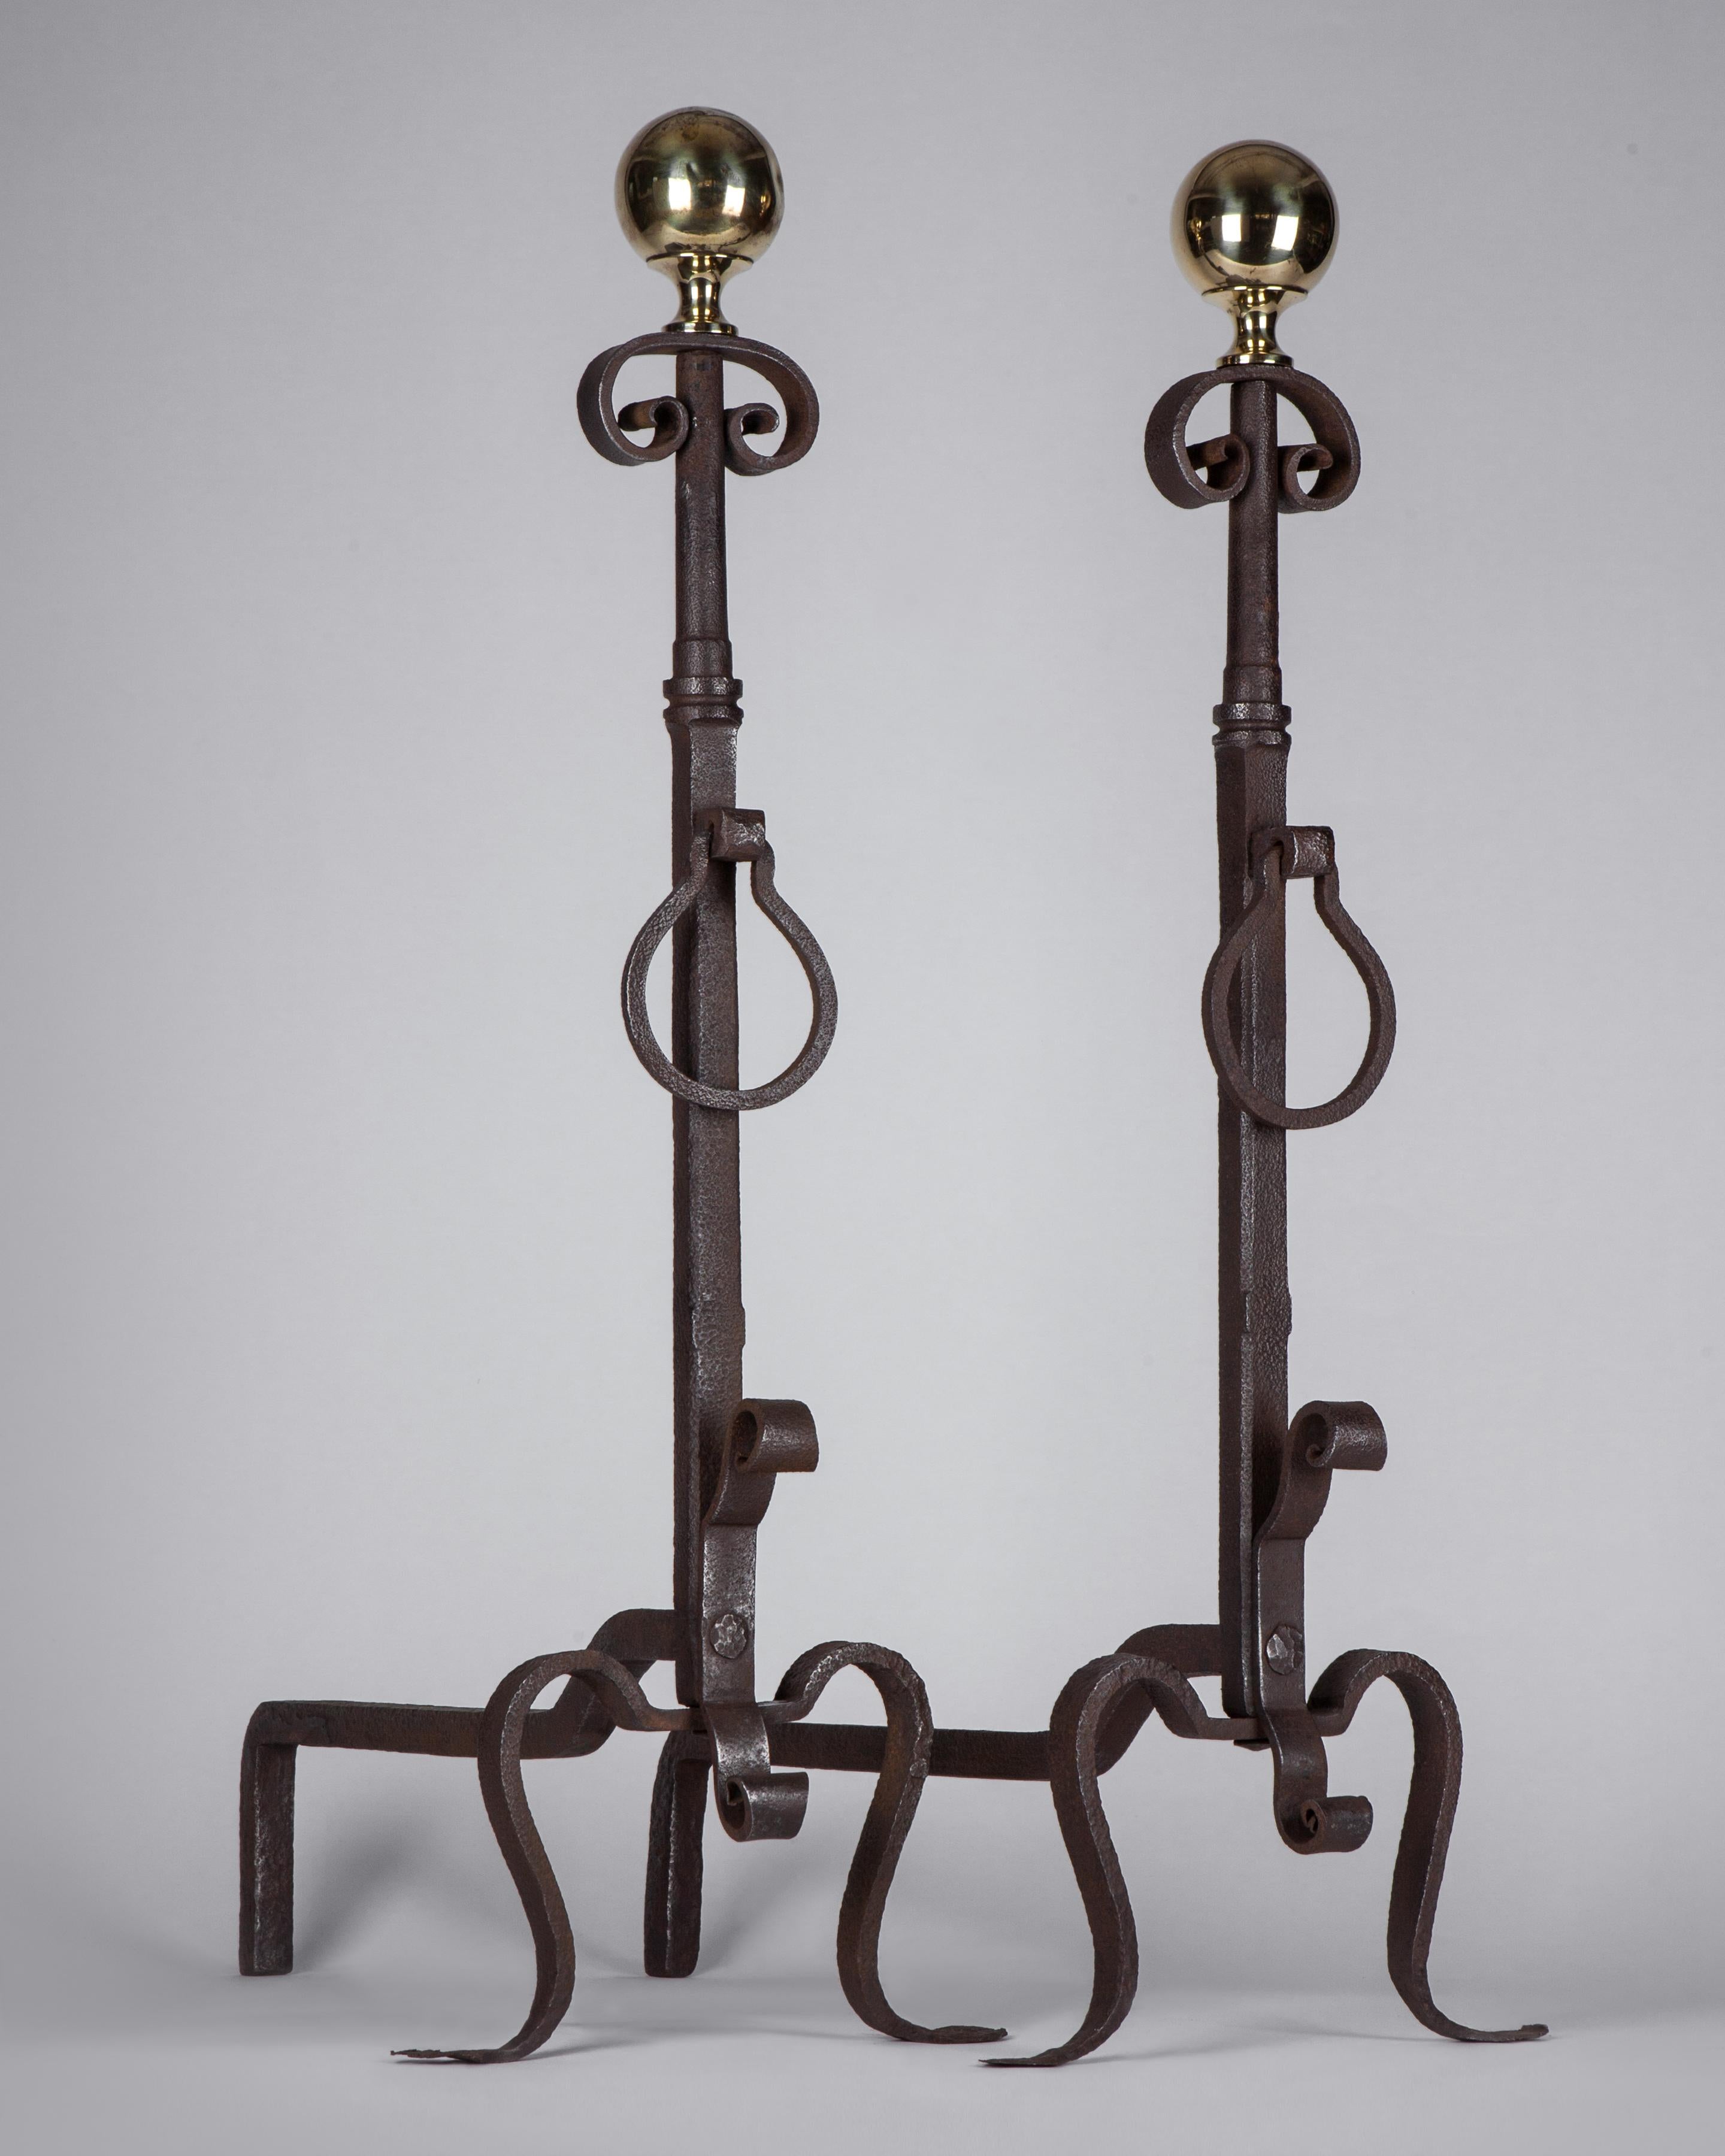 AFP0567

A pair of tall wrought iron andirons with drop-ring pendants, delicate penny feet, and large polished brass ball finials, circa 1900.

Dimensions:
Overall: 34